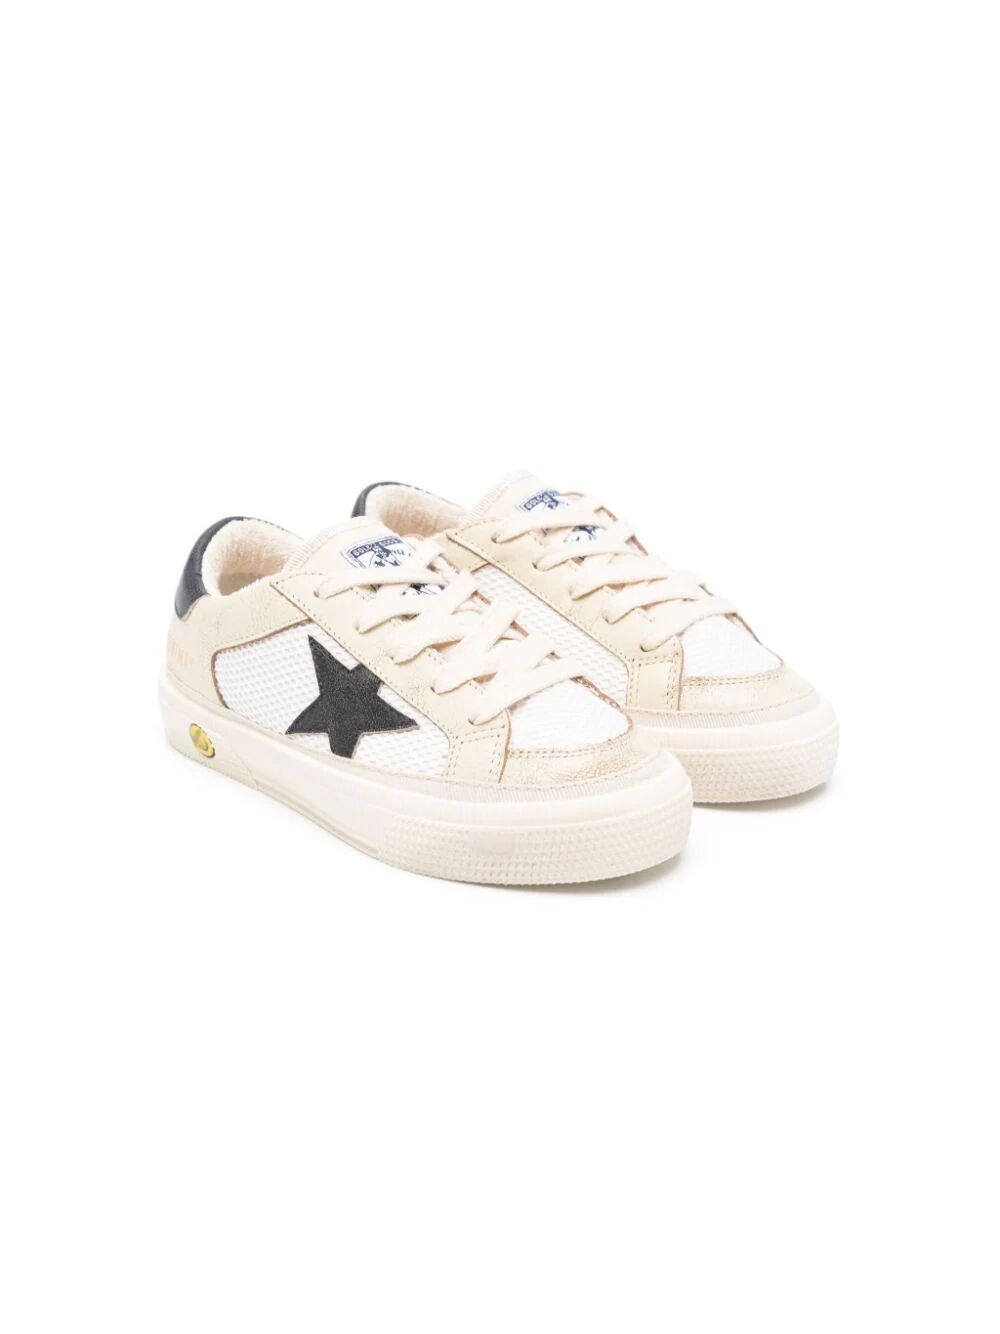 Golden Goose May Nappa Net And Leather Upper Nylon Tongue Leather Toe Star And Heel In White